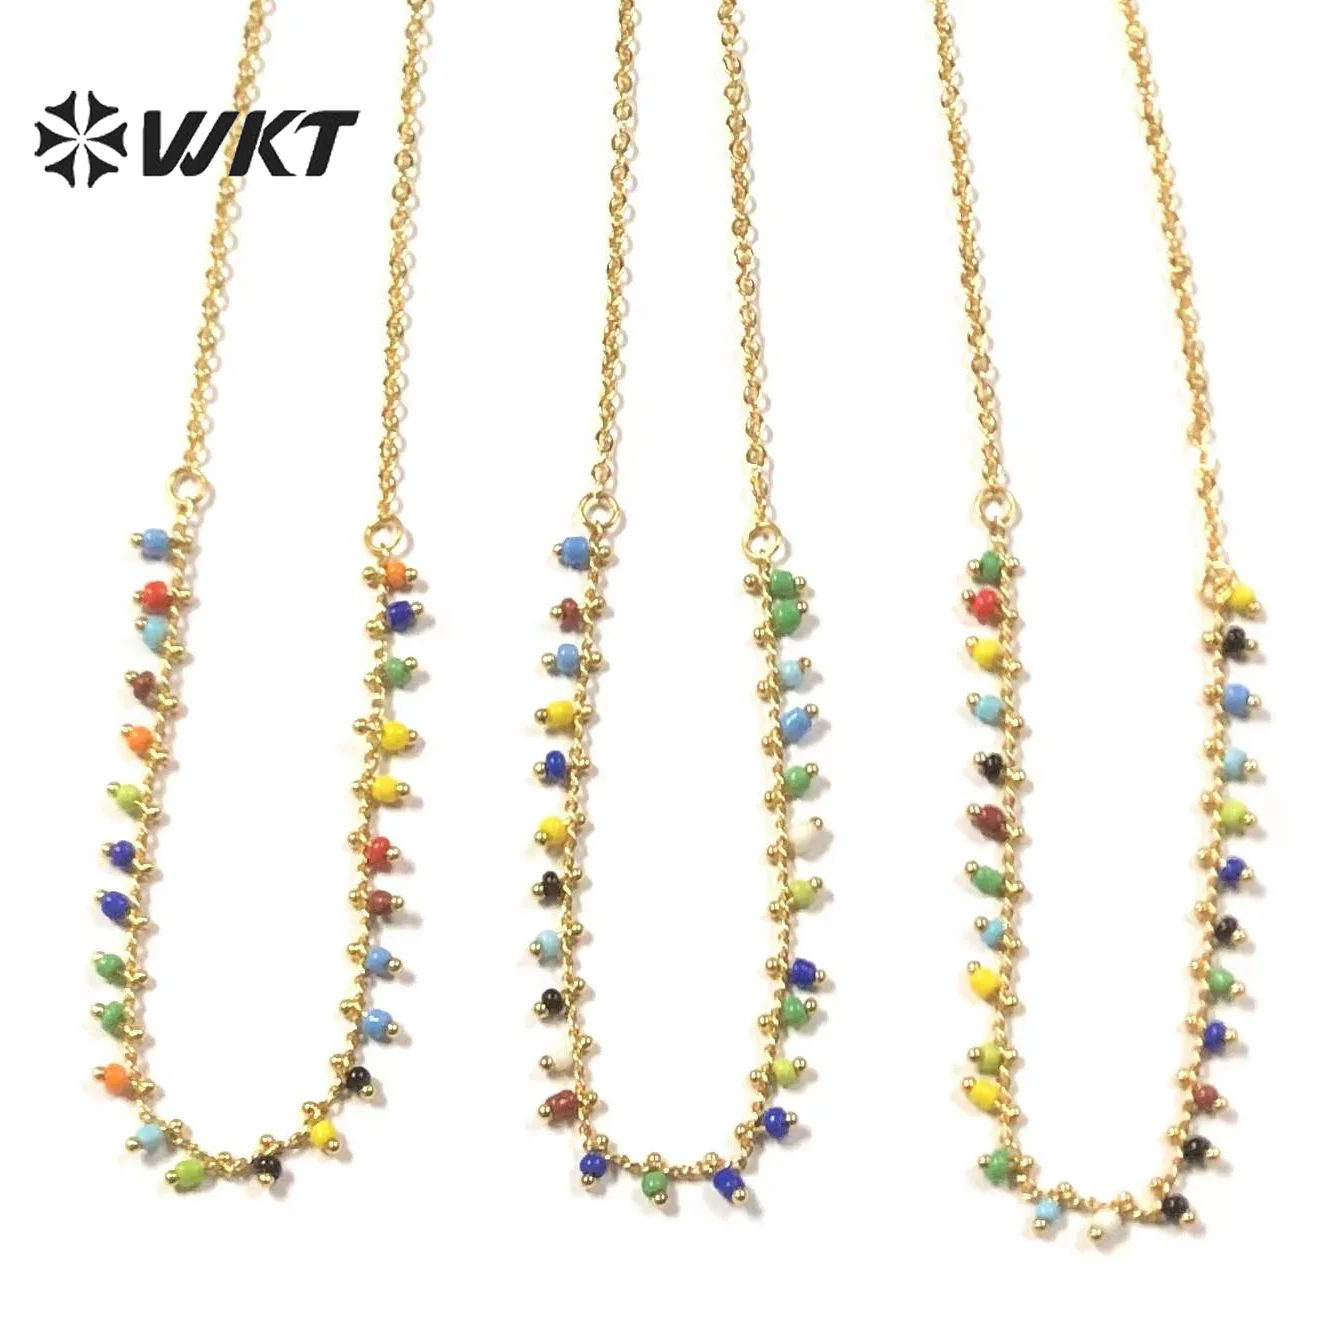 

WT-N1359 WKT 2023 Hot Style Beautiful Small Resin Beads Necklace Gold Brass Chain For Women Fine Jewelry Birthday Party ACC